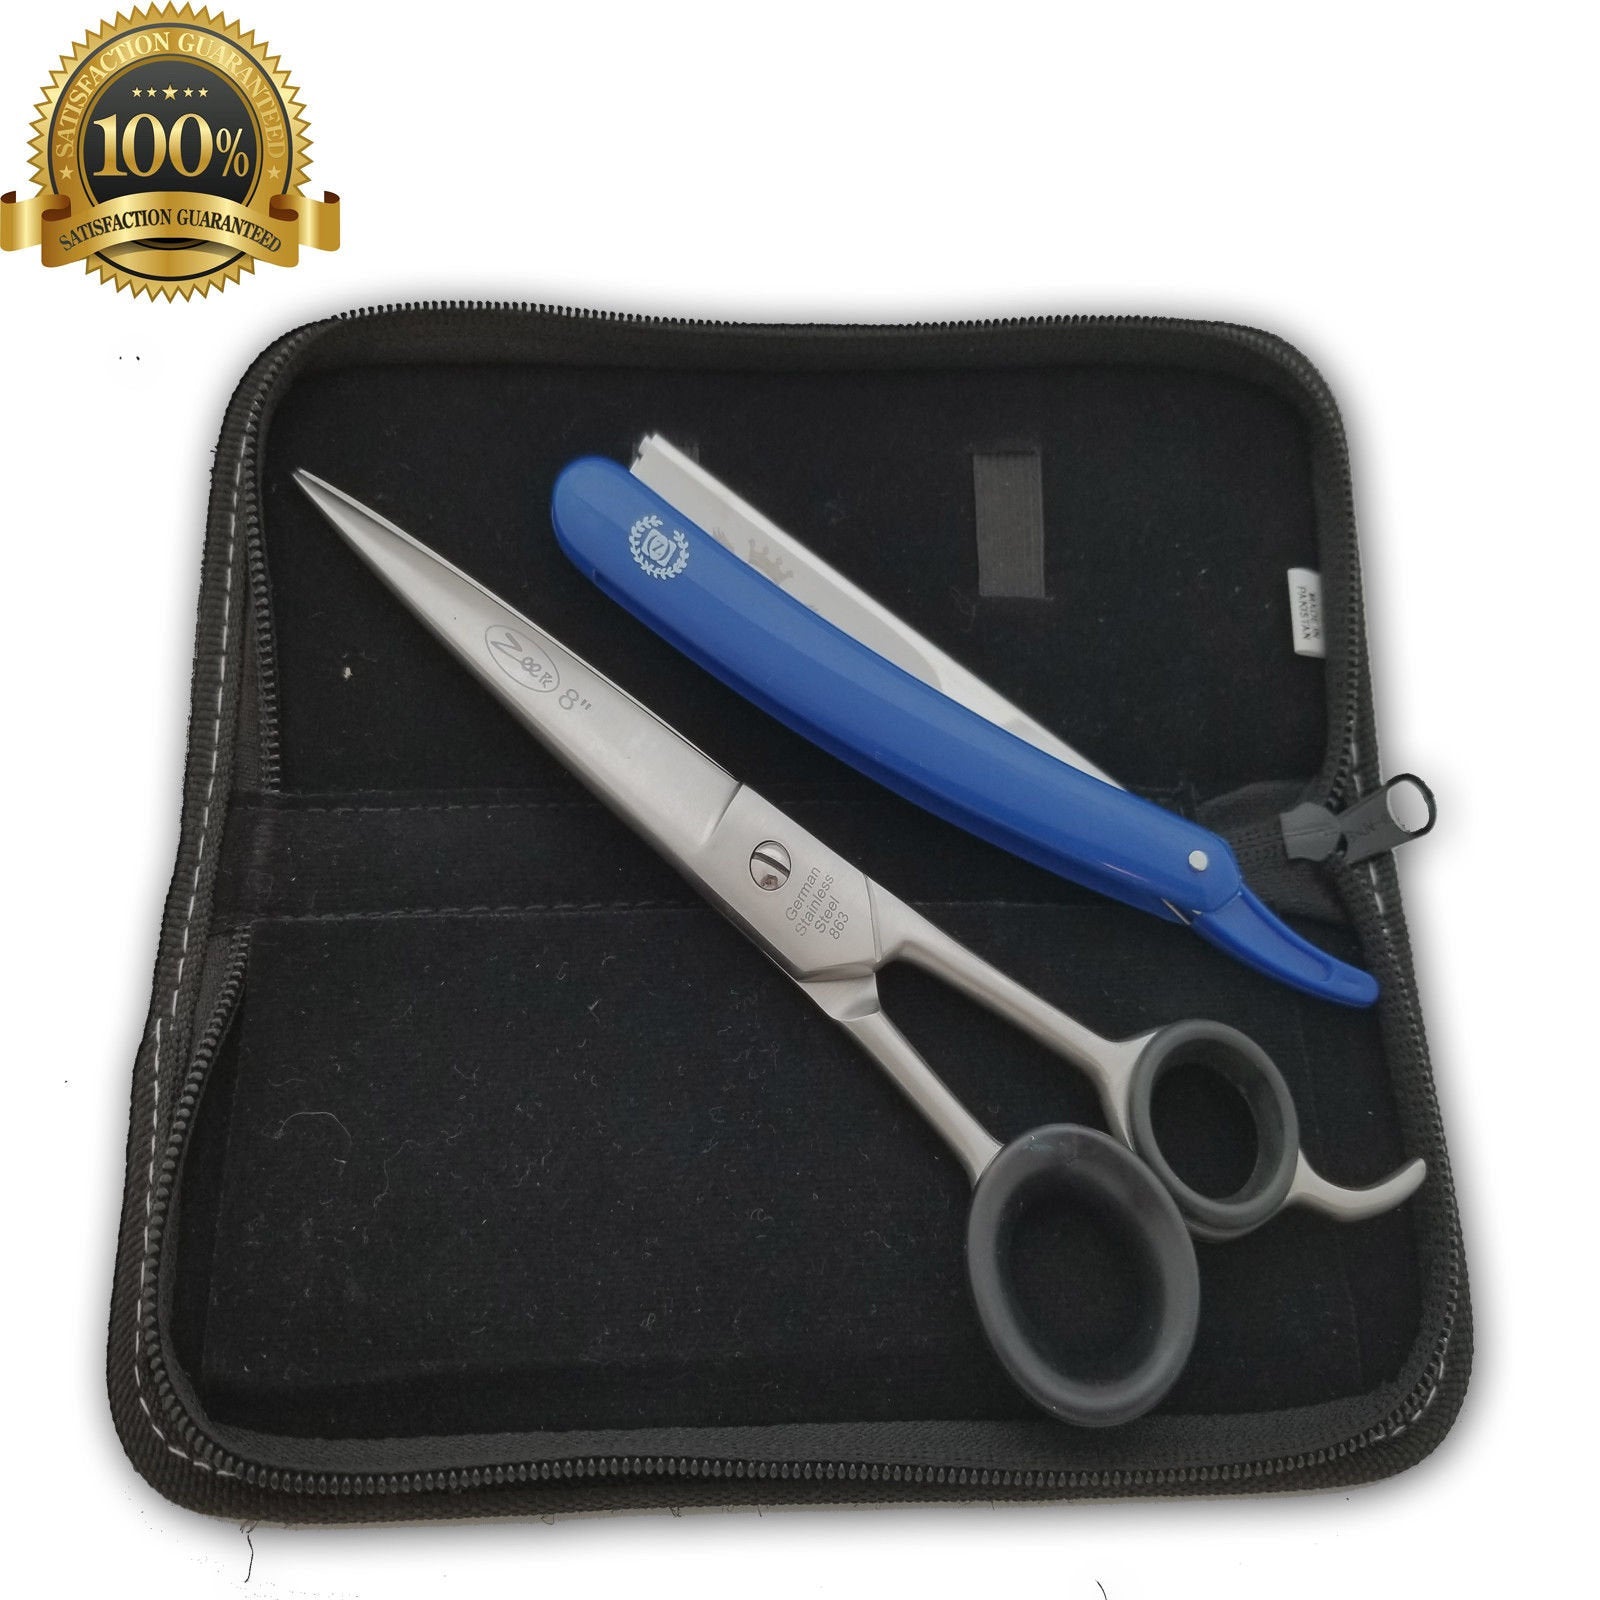 Professional GERMAN Stainless Barber Hair Cutting Scissors Shears 8 NEW